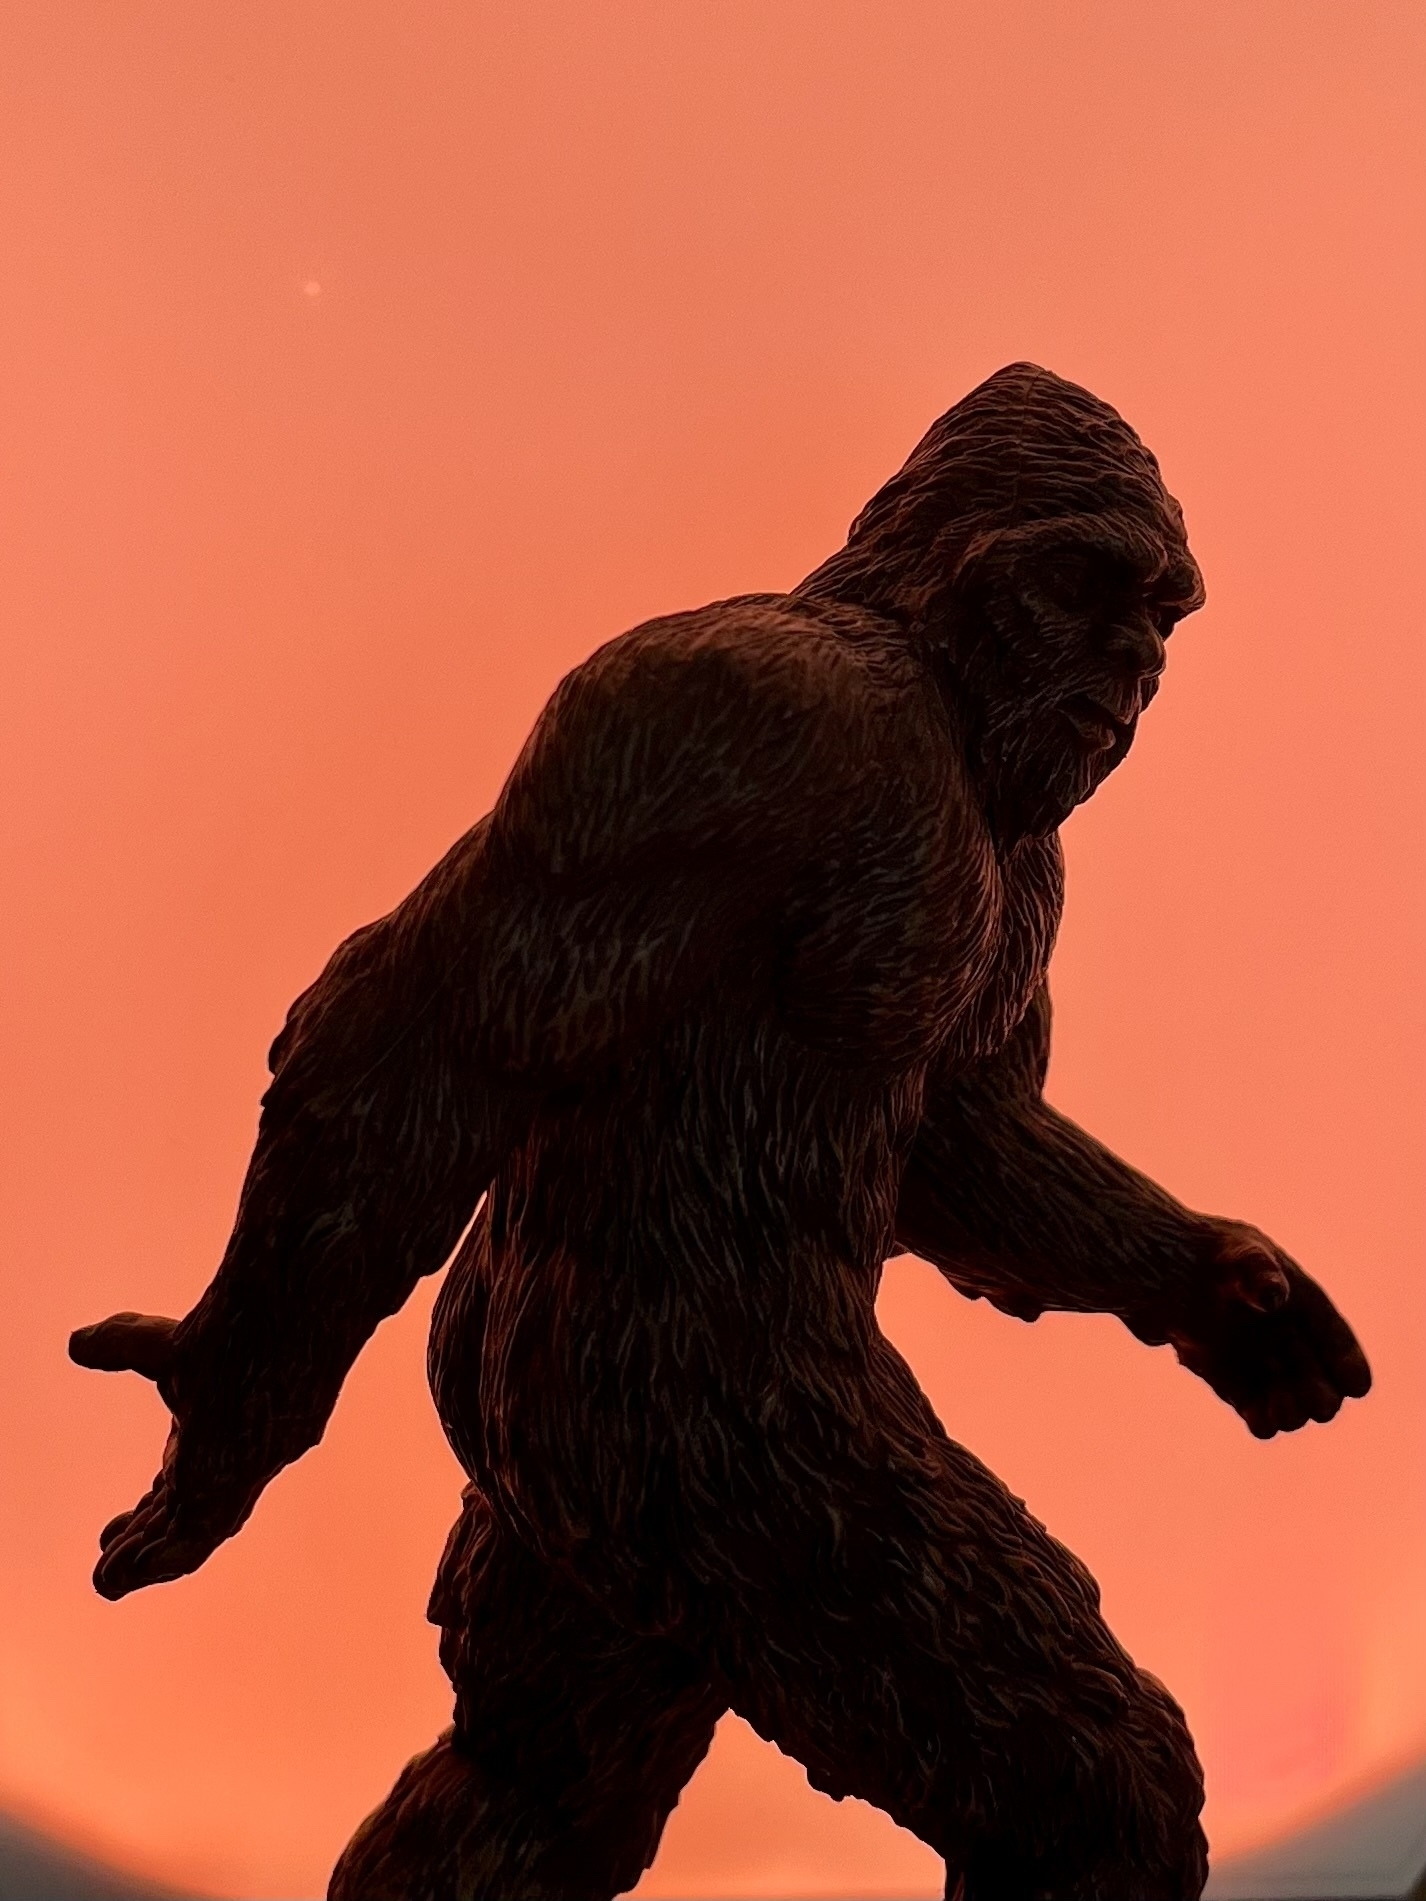 The silhouette of a Sasquatch against an orange background. 